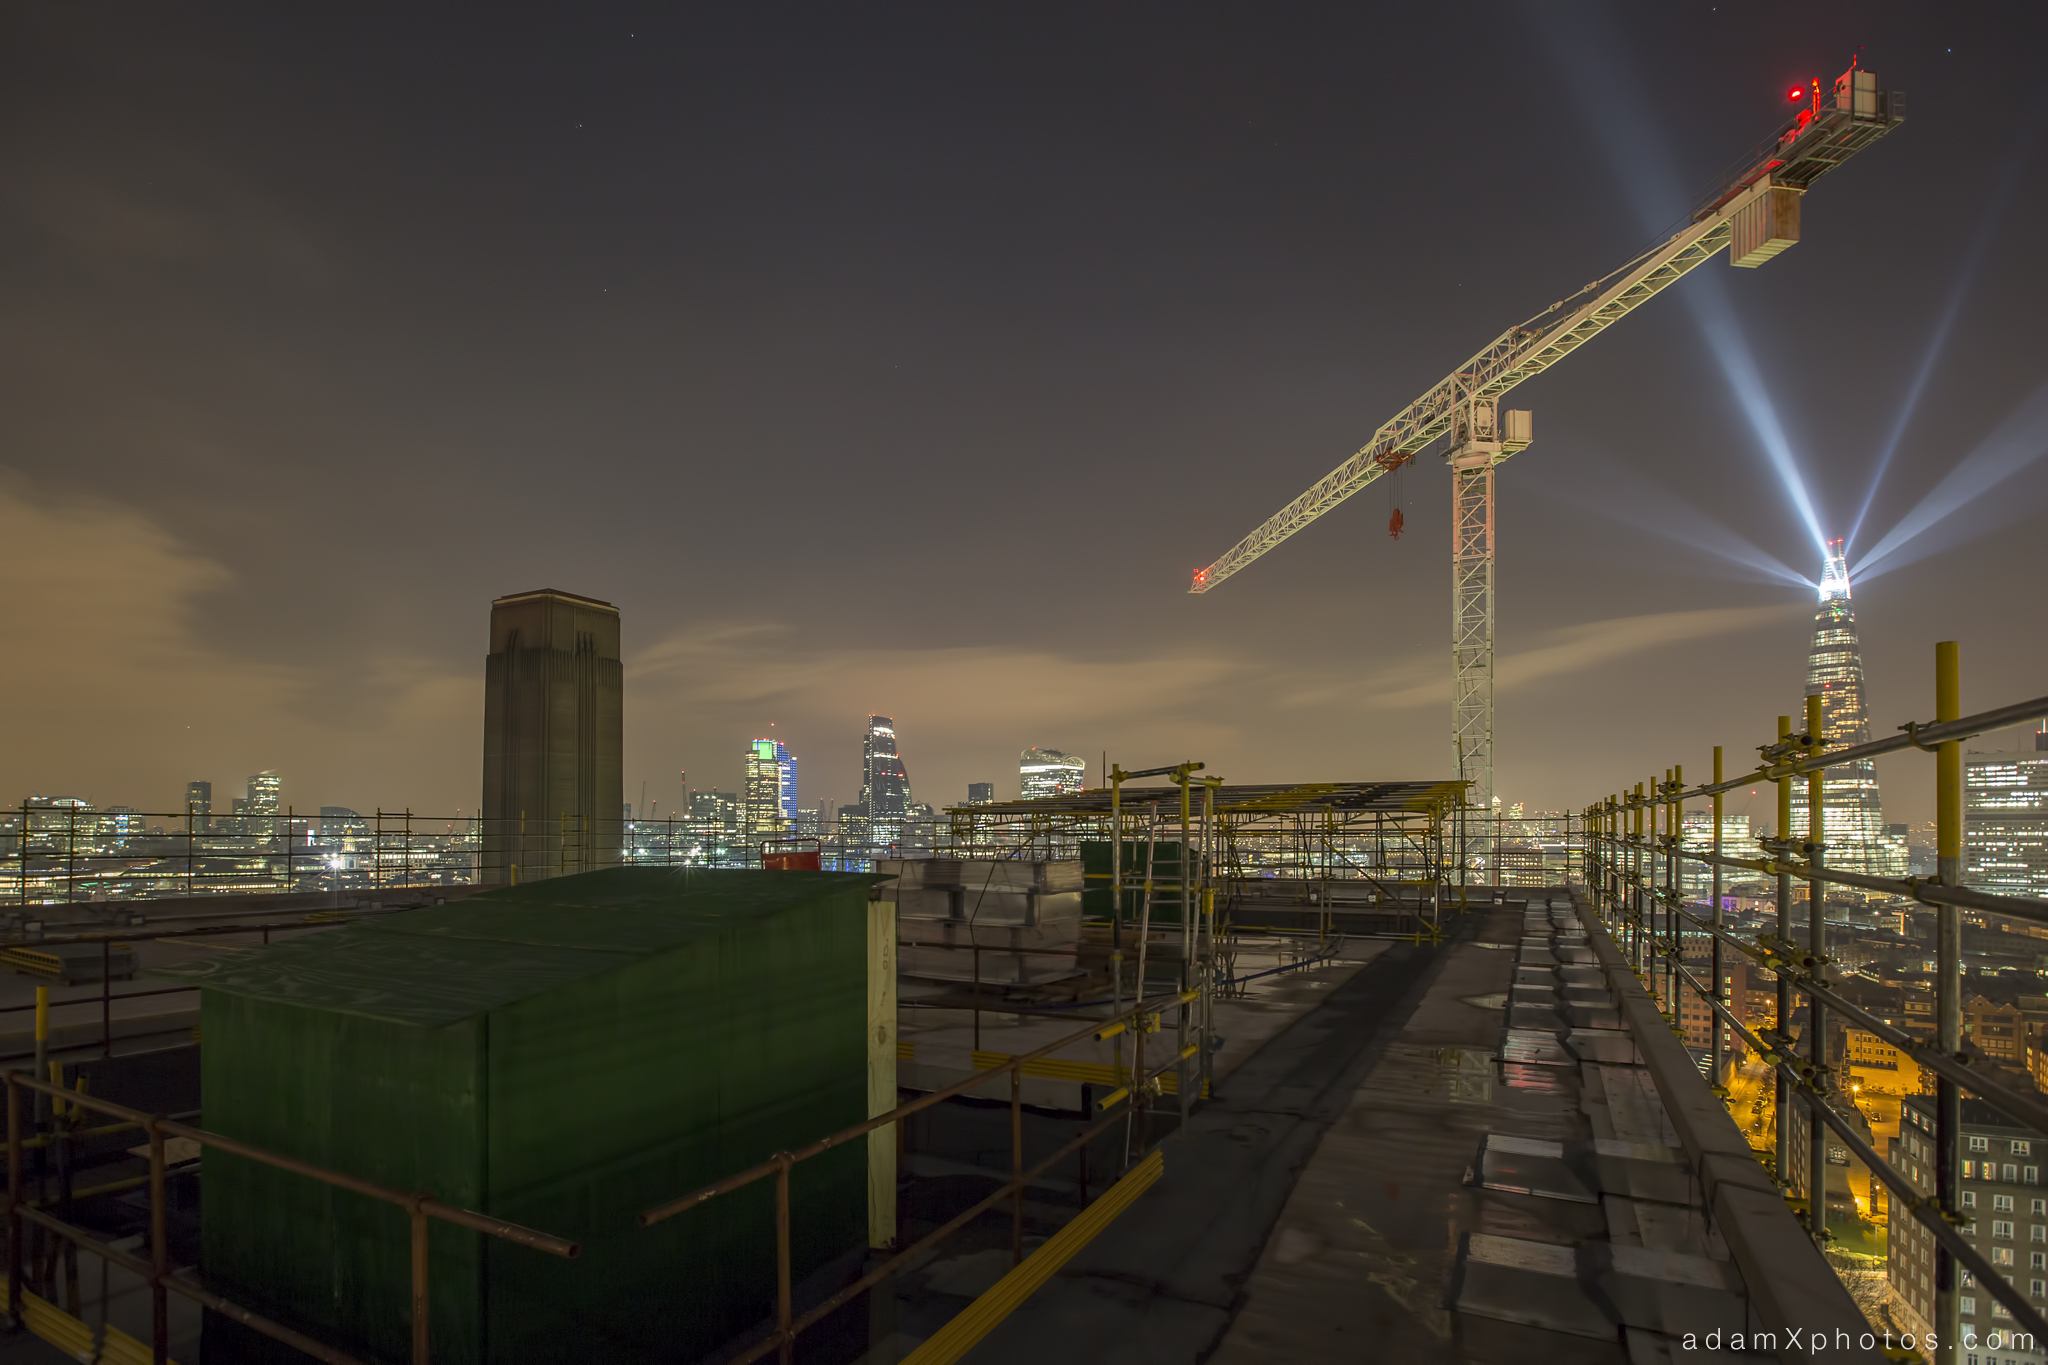 New year's years eve 2014 2015 Adam X Urbex UE Urban Exploration London Rooftops High Night Photo Photography Skyline THM crane south bank thames shard walkie talkie st pauls cathedral